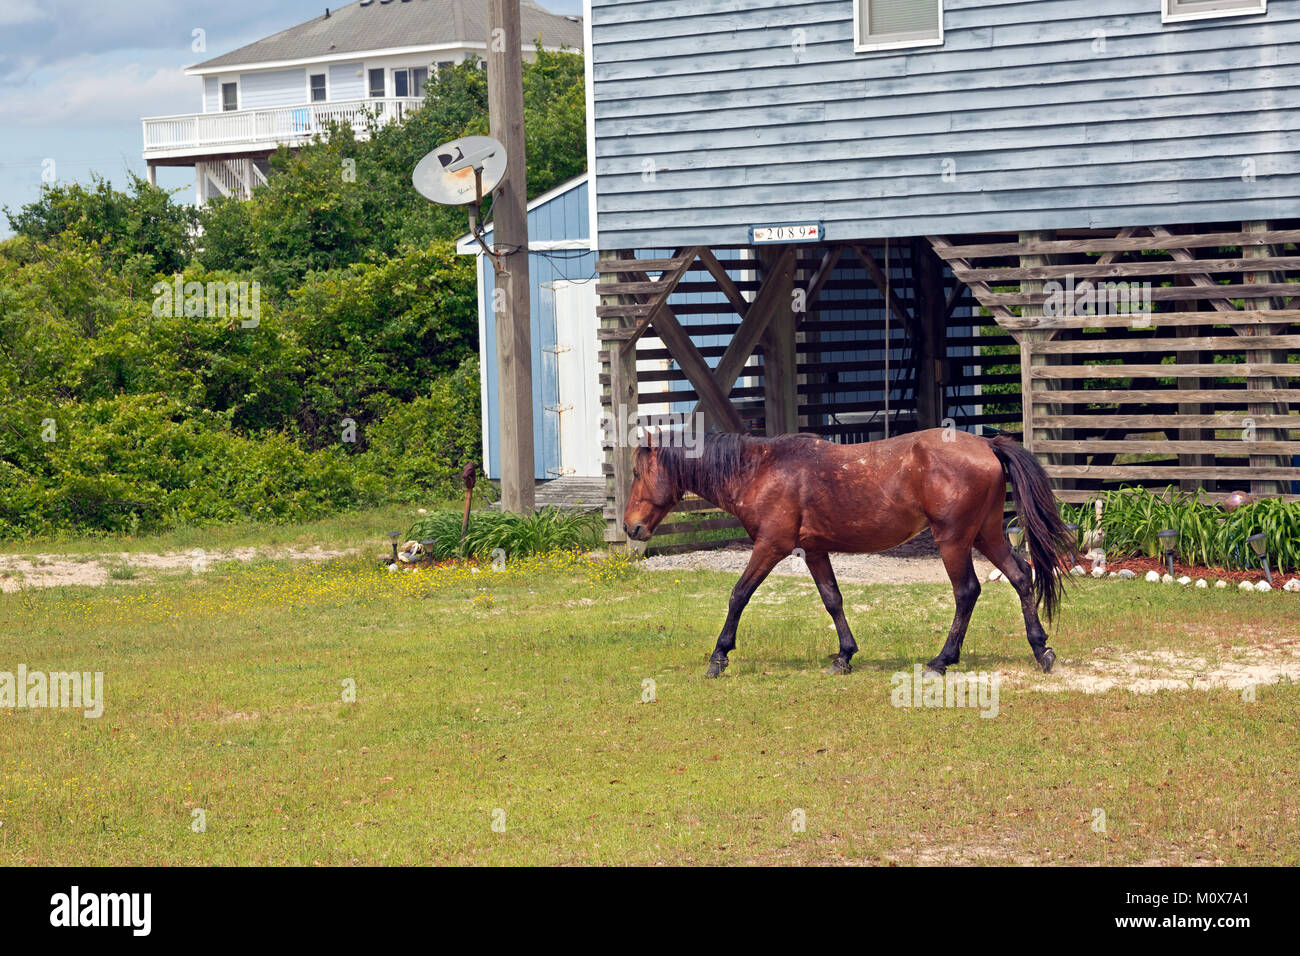 NC01414-00...NORTH CAROLINA - One of the semi-wild Banker horses walking through an issolated beach side community on the Outer Banks, north of Corrol Stock Photo